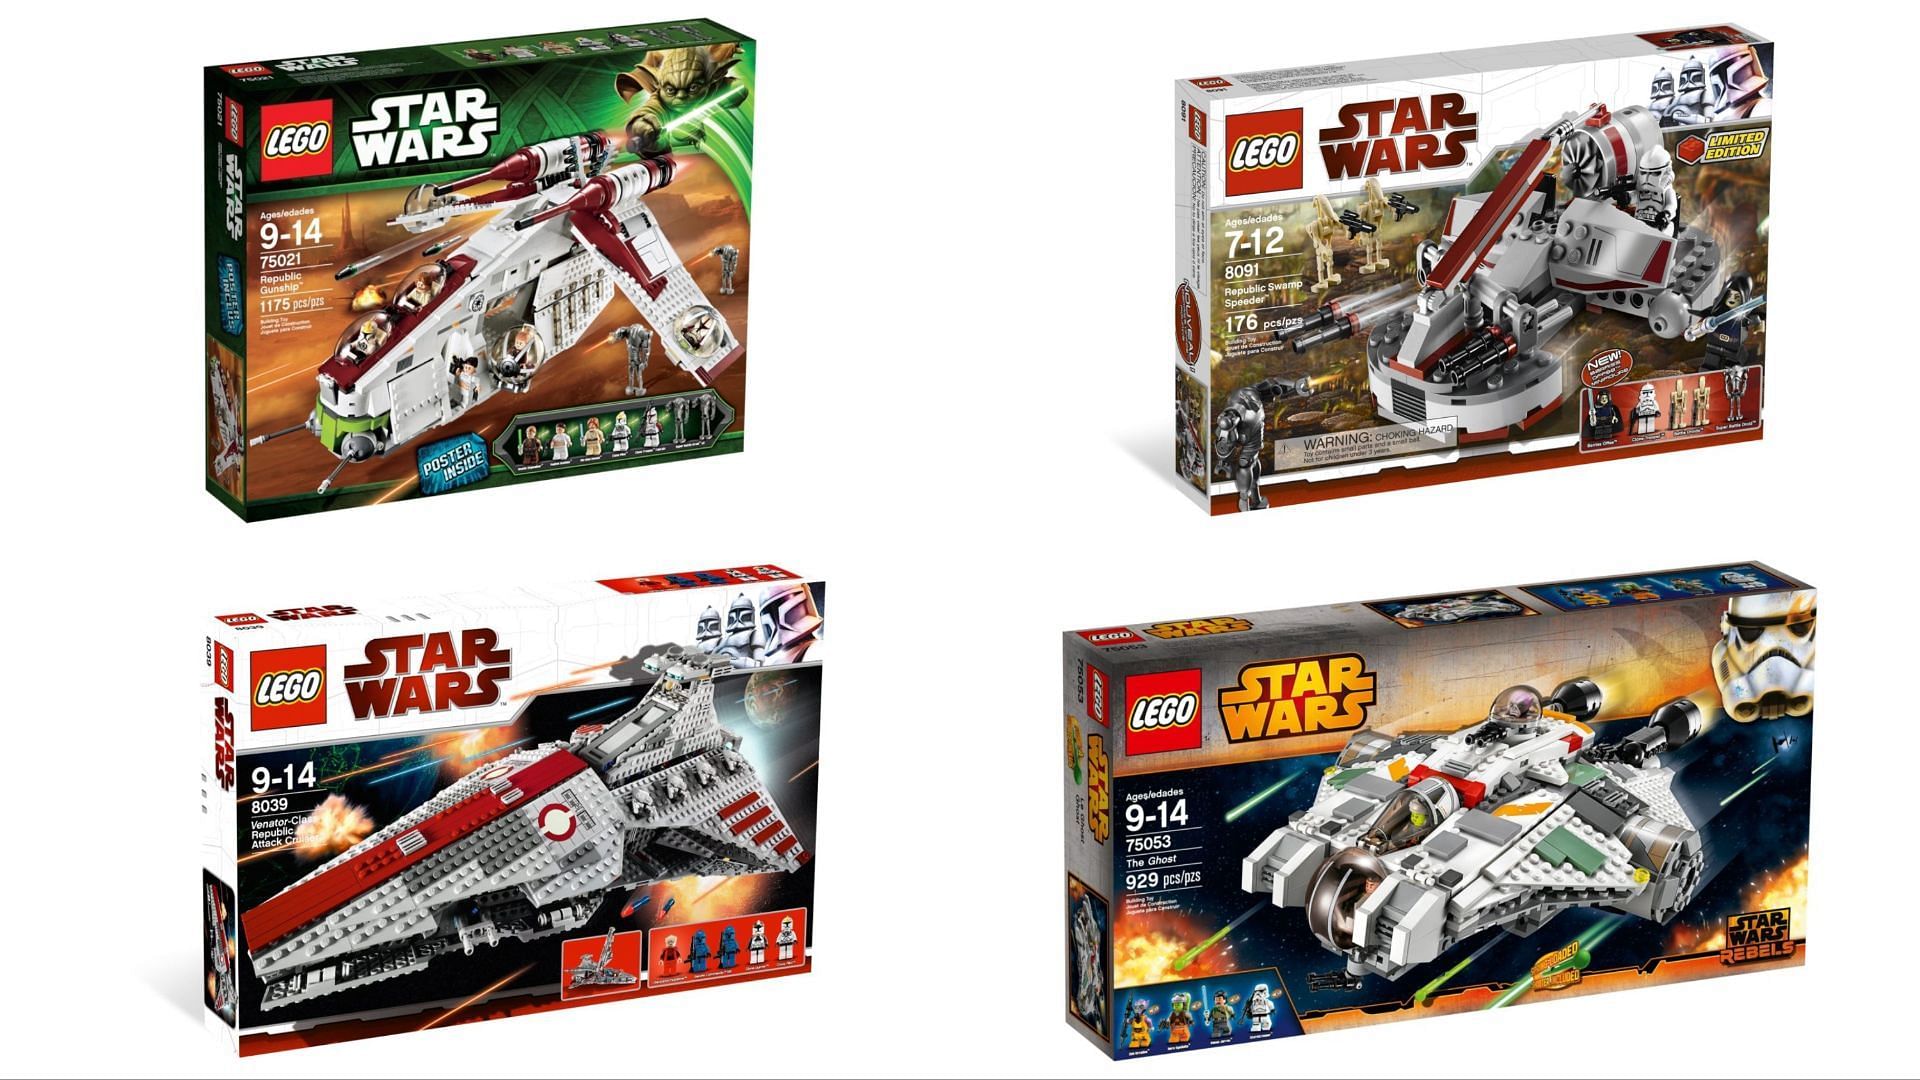 Some of the leaked Star Wars sets that are rumored to be launched in Summer 2023 (Image via Lego/BrickFanatics/Leaks)